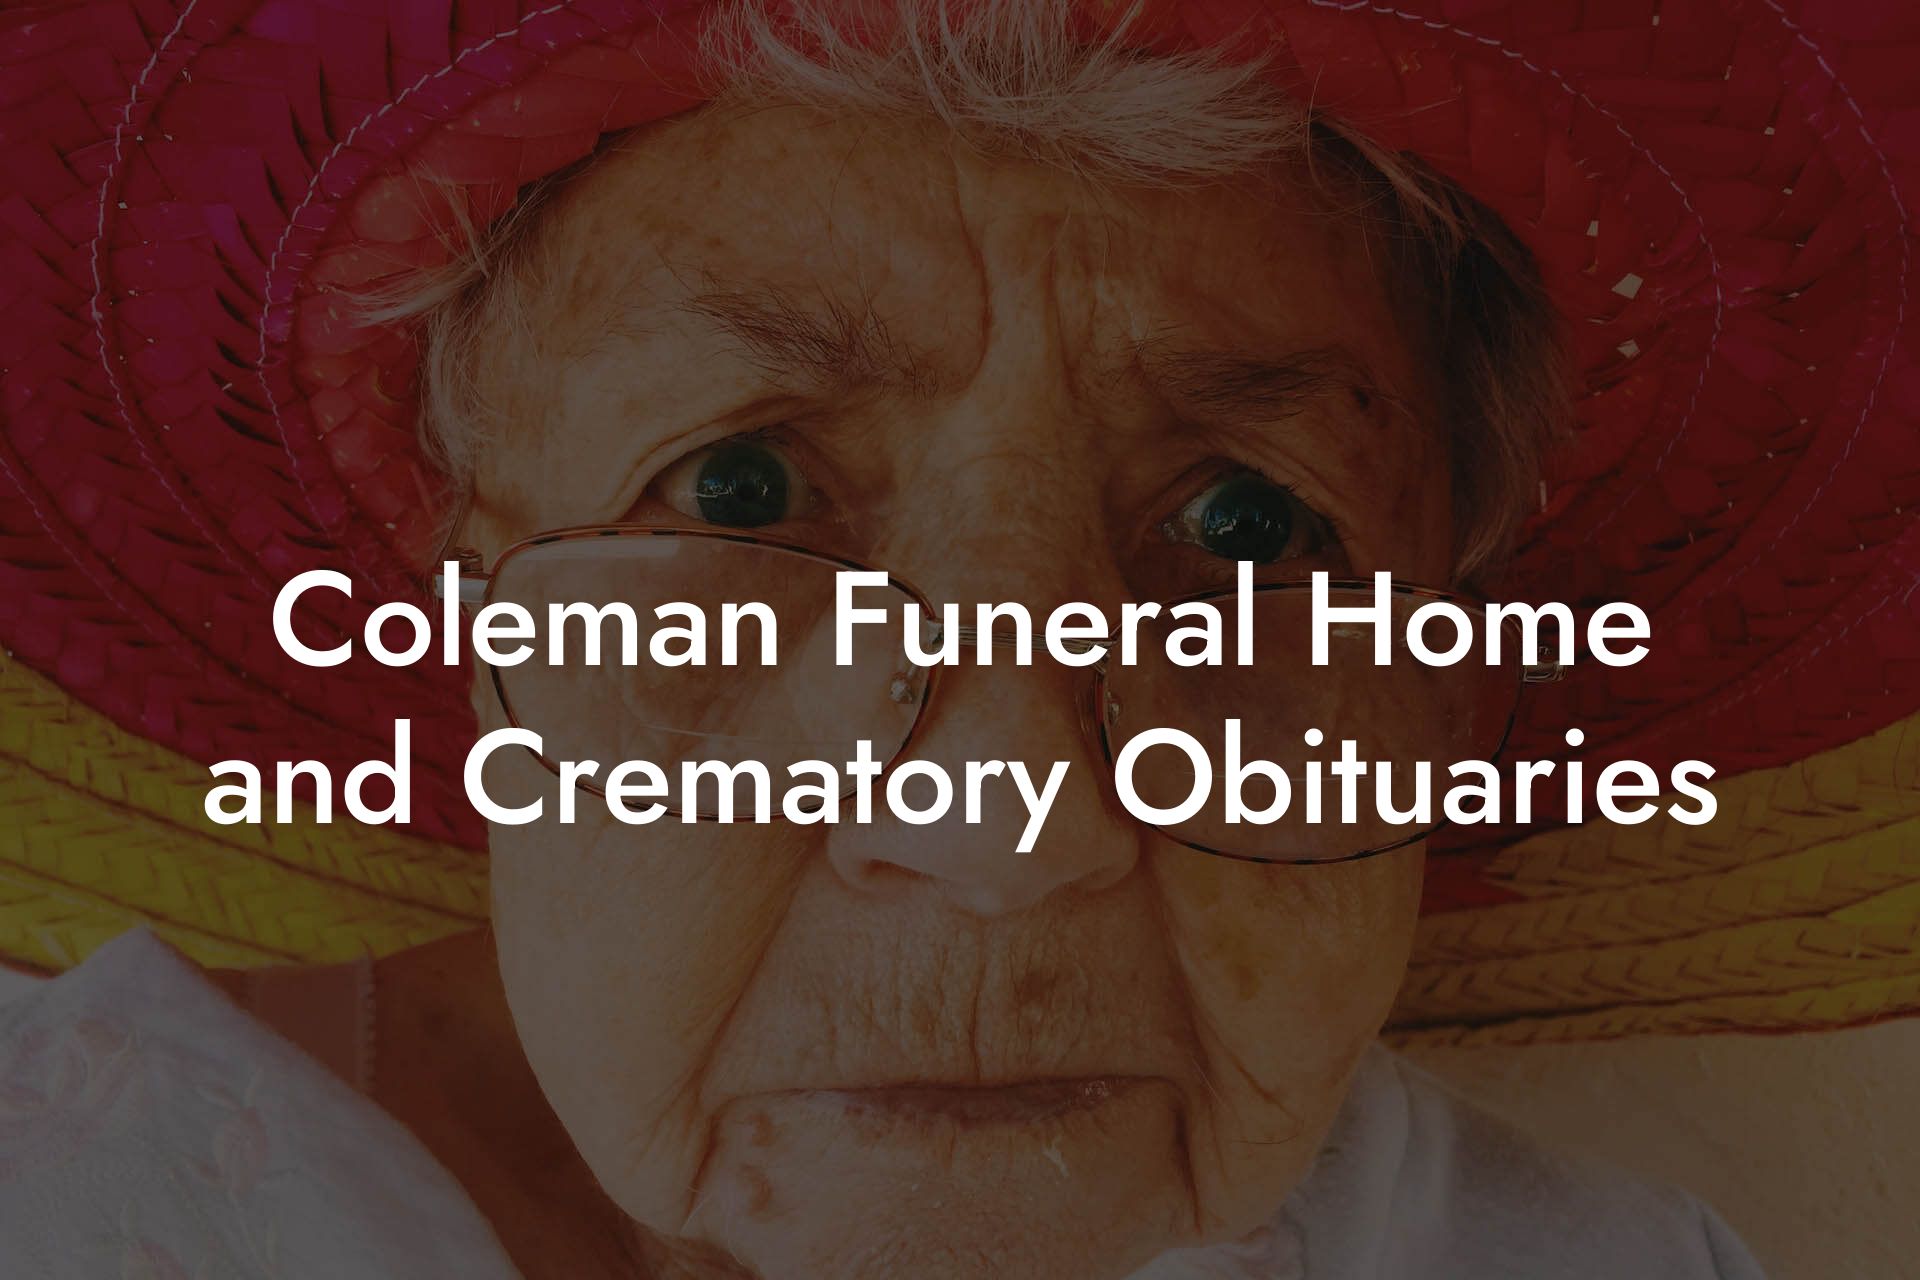 Coleman Funeral Home and Crematory Obituaries